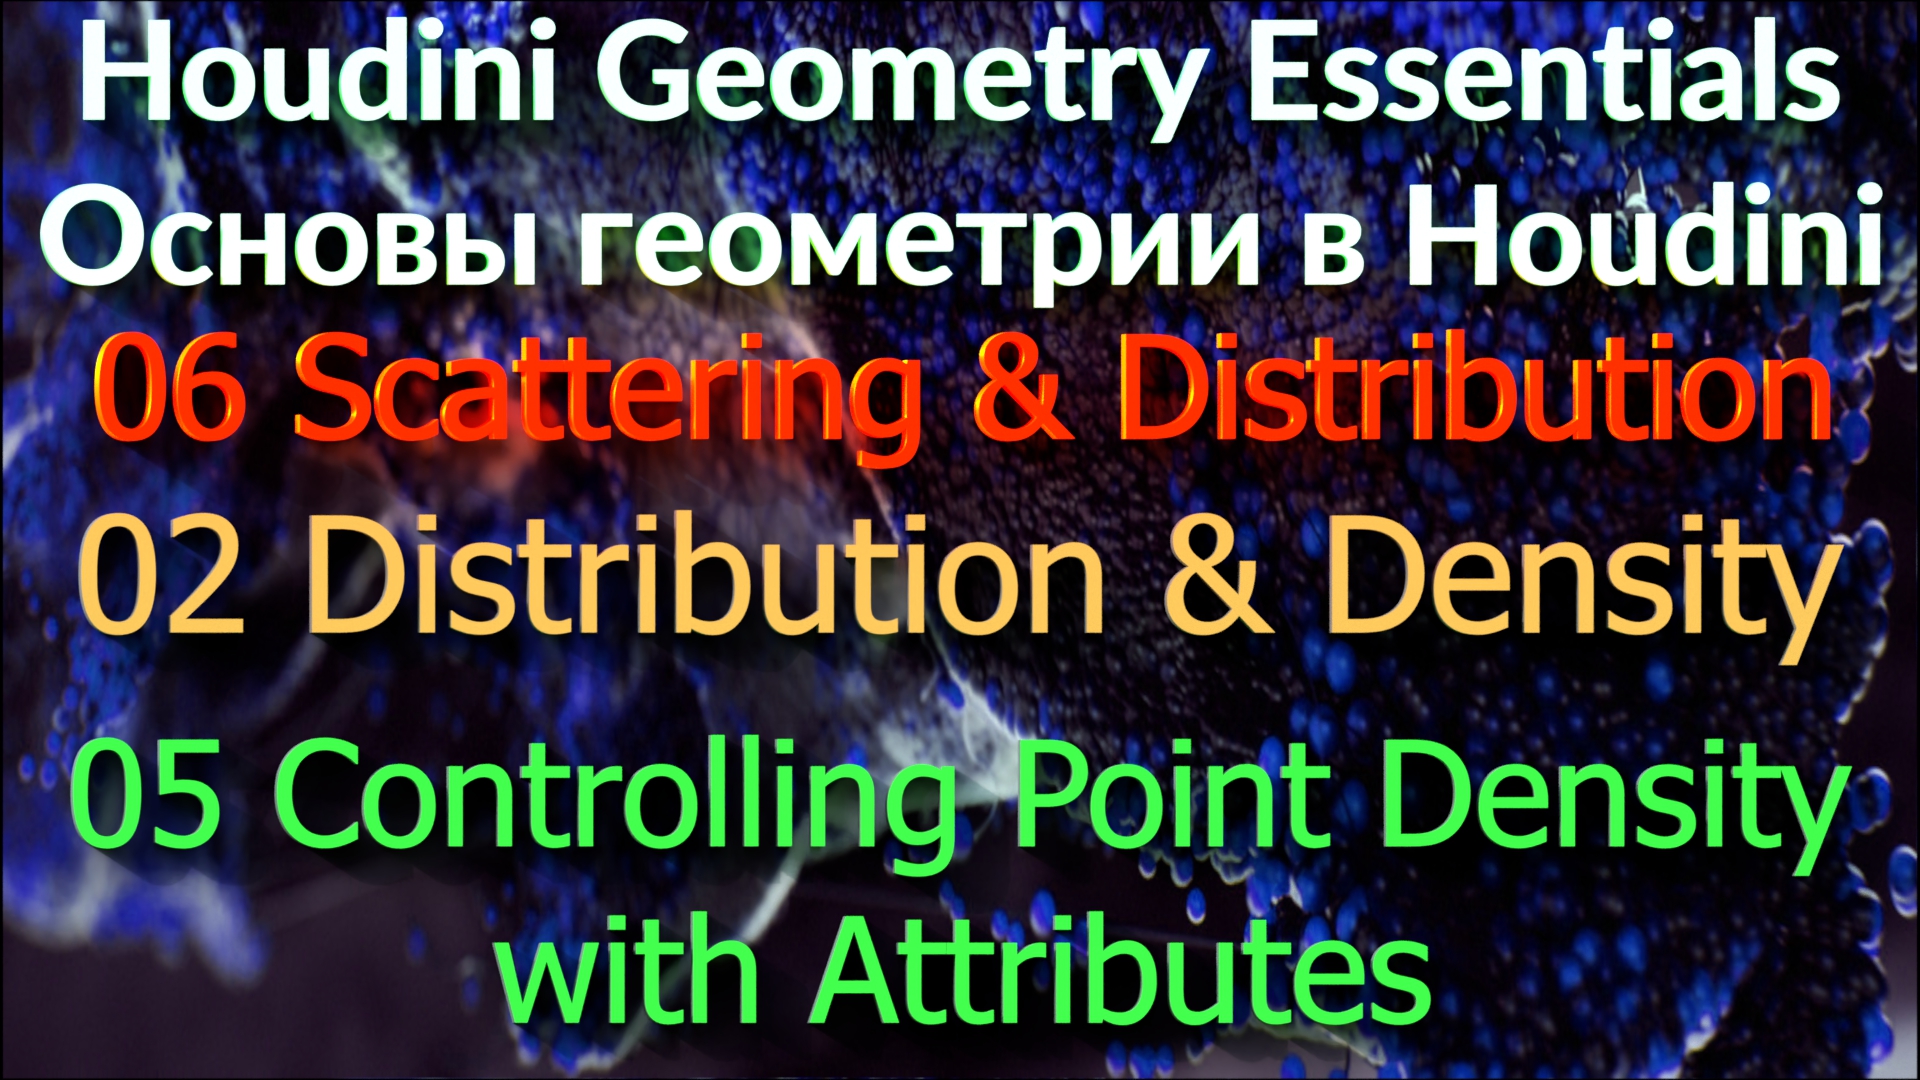 06_02_05 Controlling Point Density with Attributes